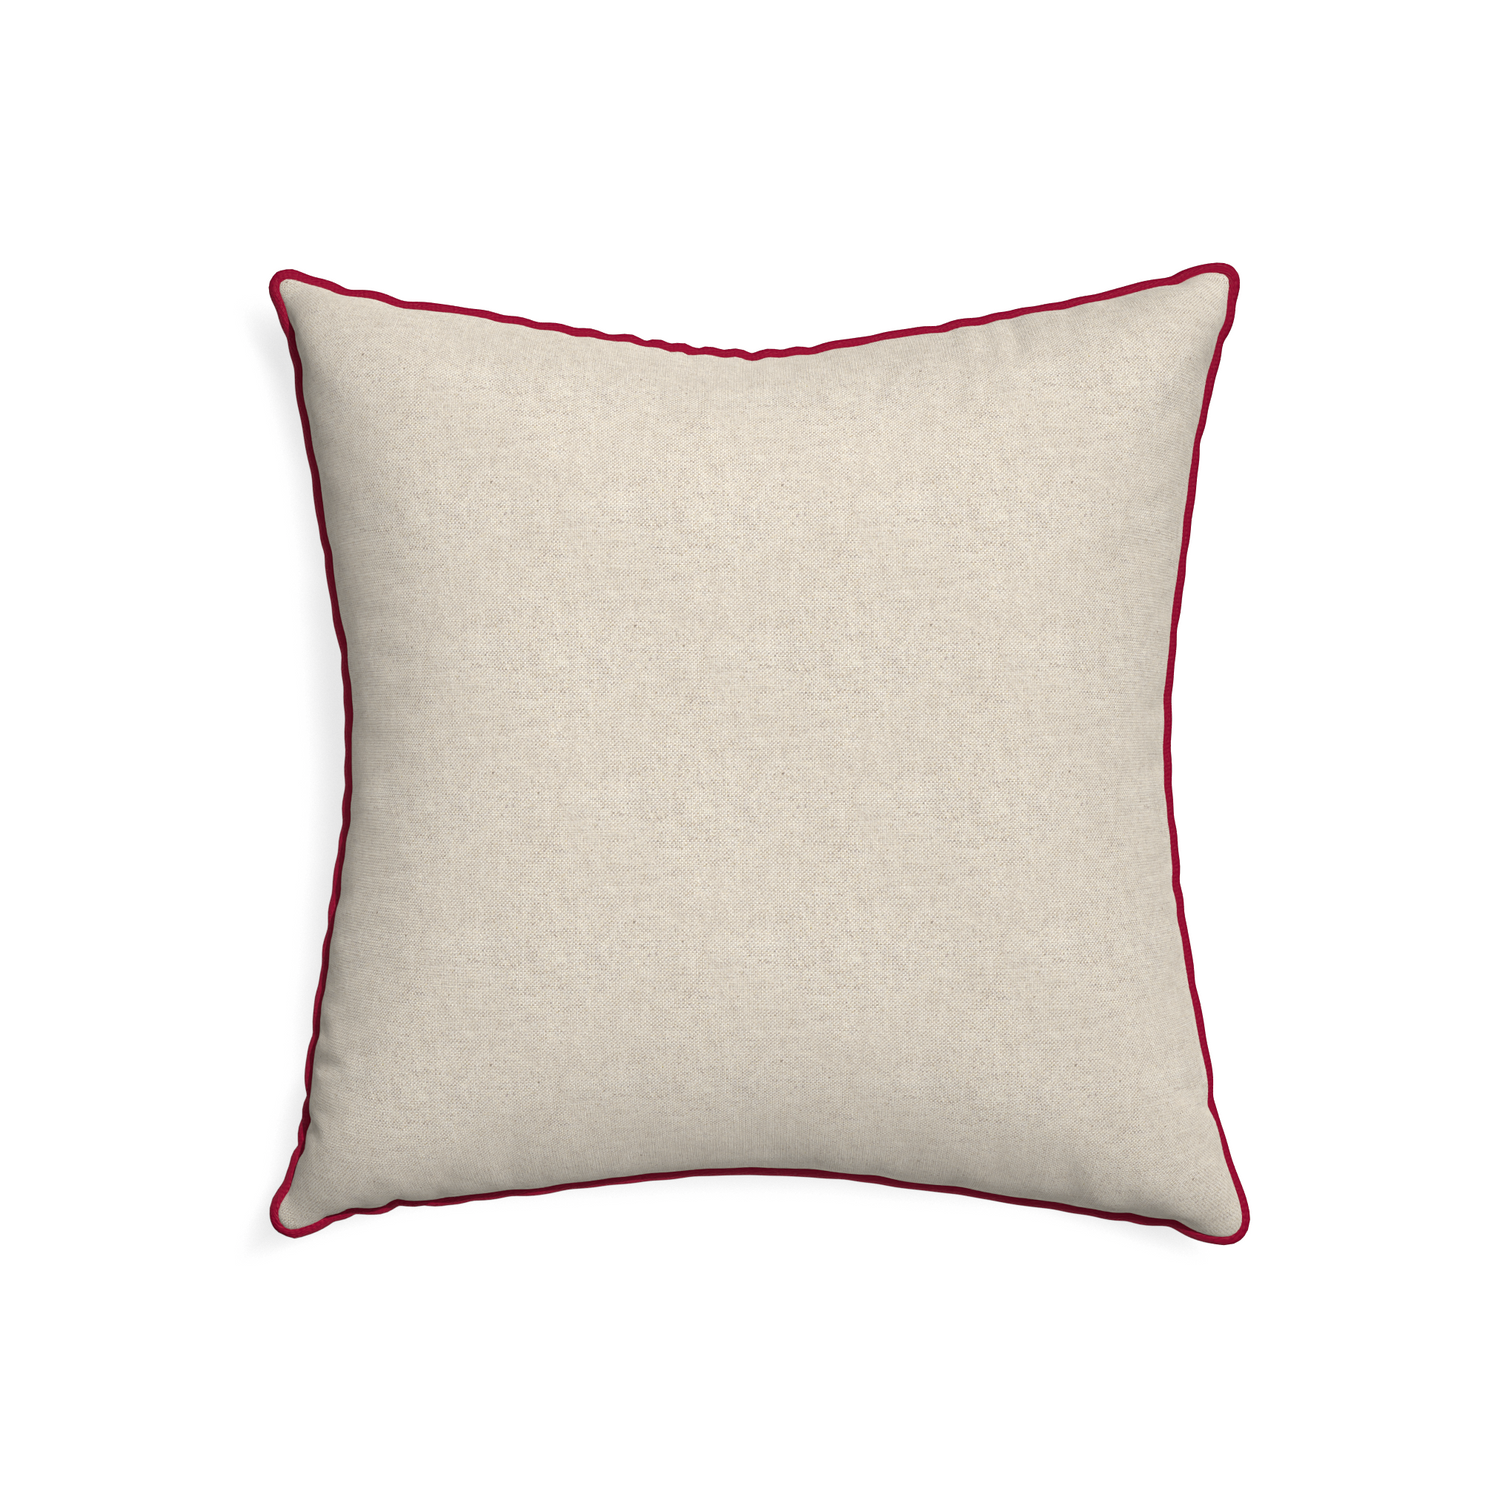 22-square oat custom pillow with raspberry piping on white background